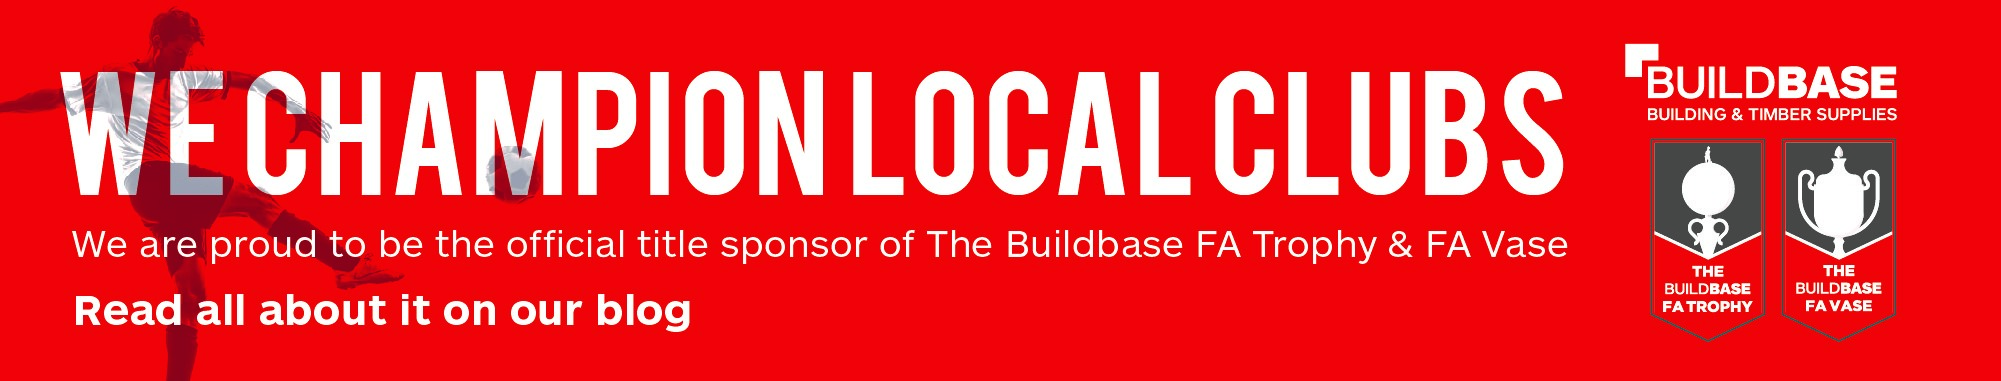 Buildbase, Builders Merchants. Designed for the trade - Open to the public